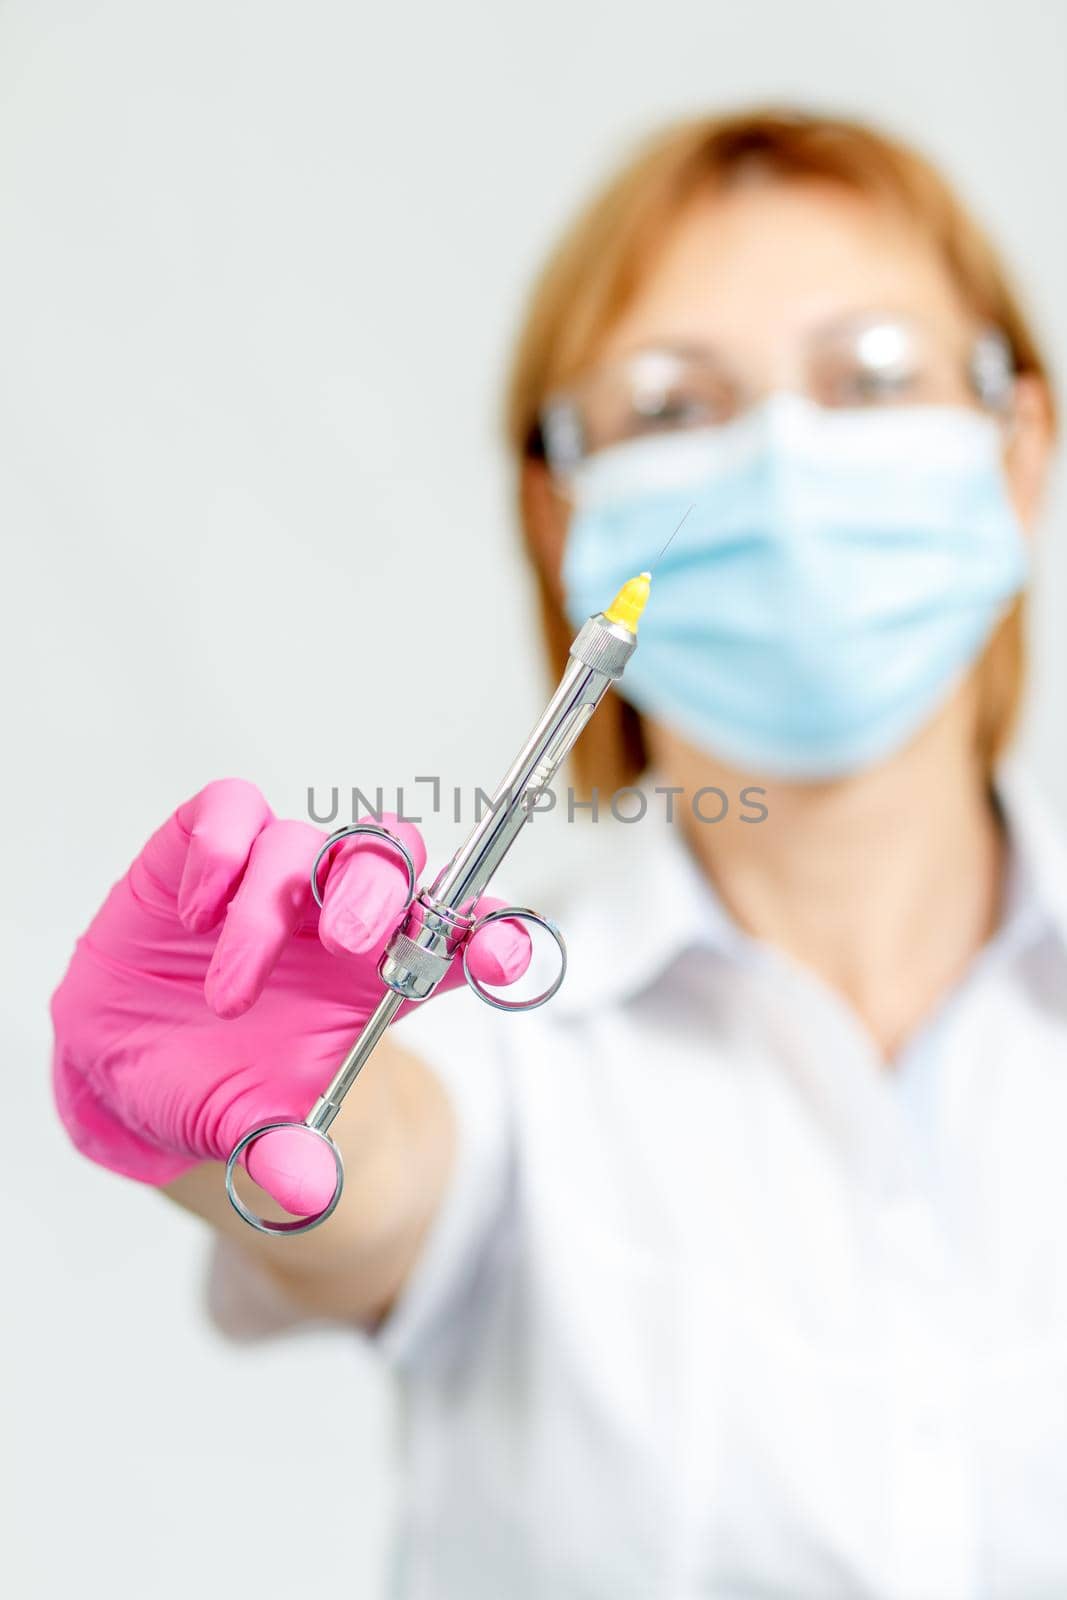 Female doctor in mask, glasses, pink glove holding syringe with anesthetic and needle. Selective focus on syringe